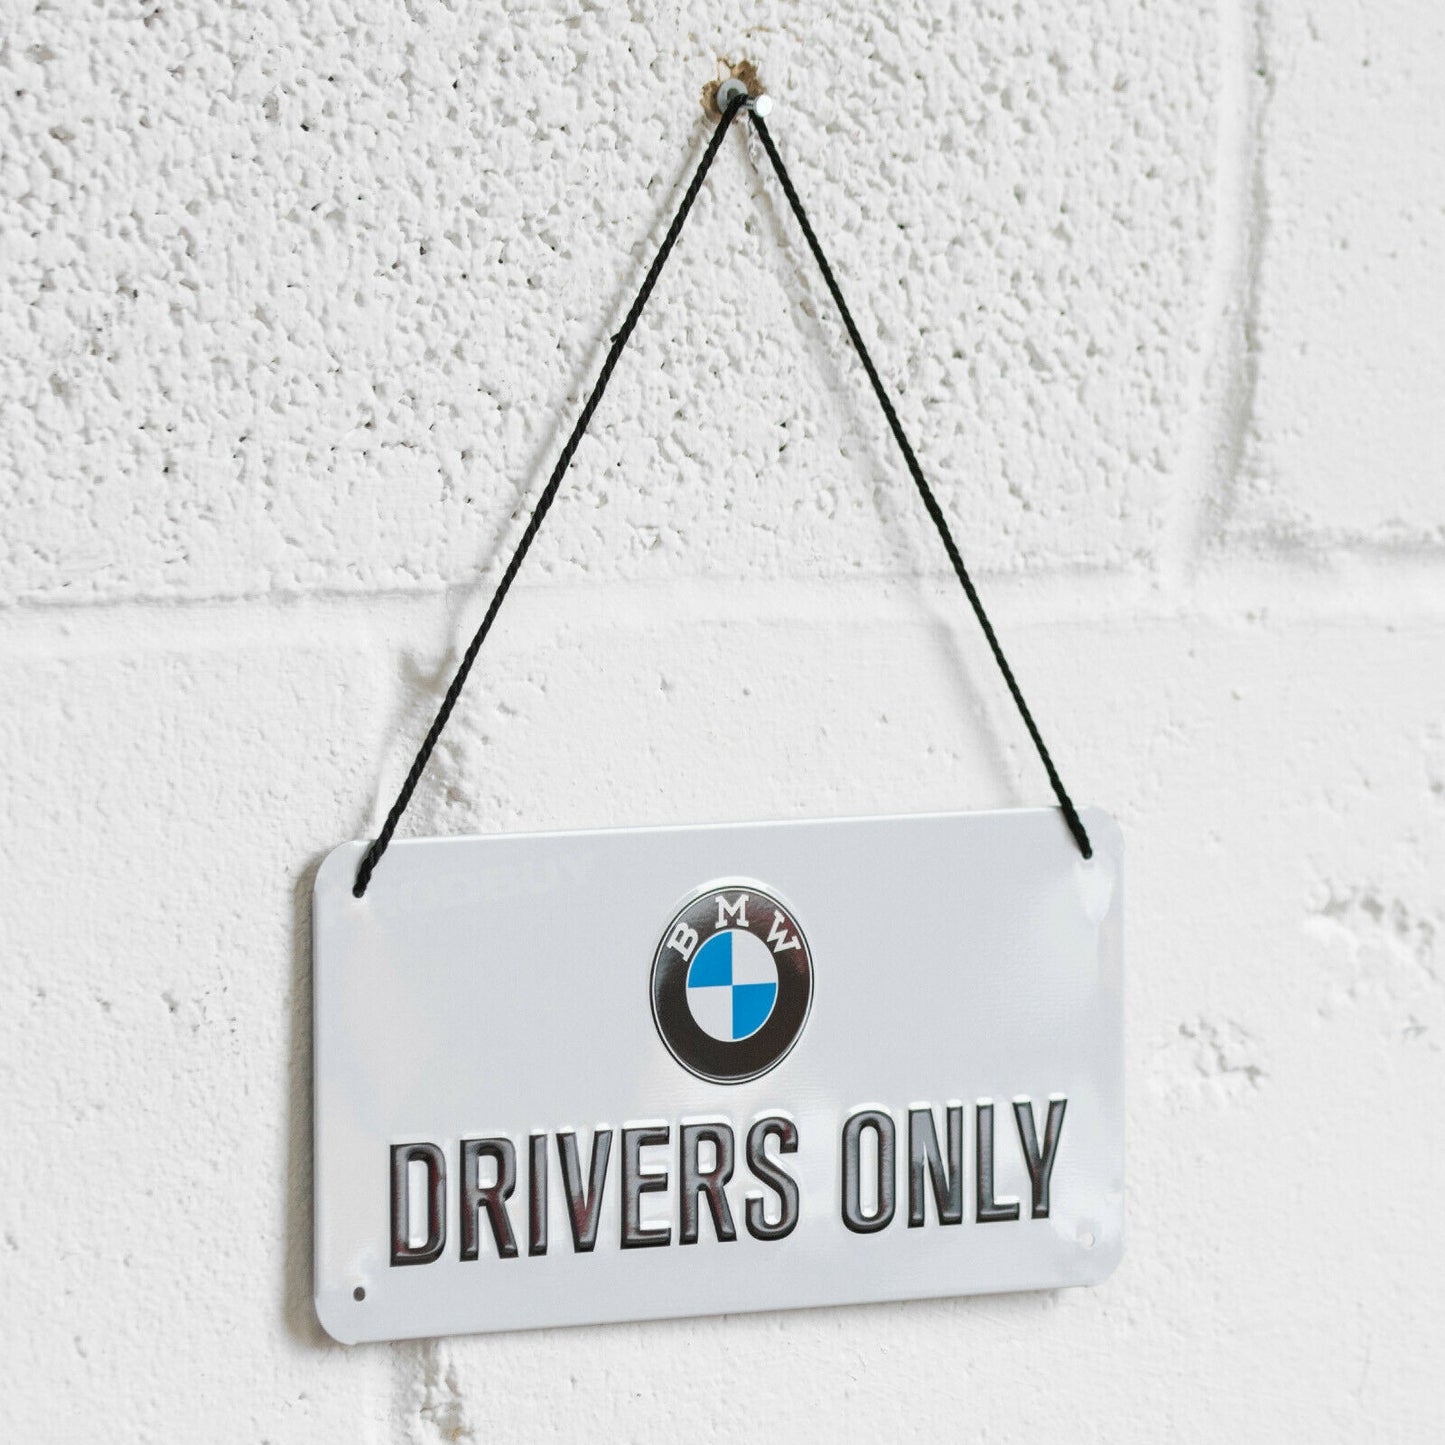 'BMW Drivers Only' 20cm Hanging Metal Wall Sign